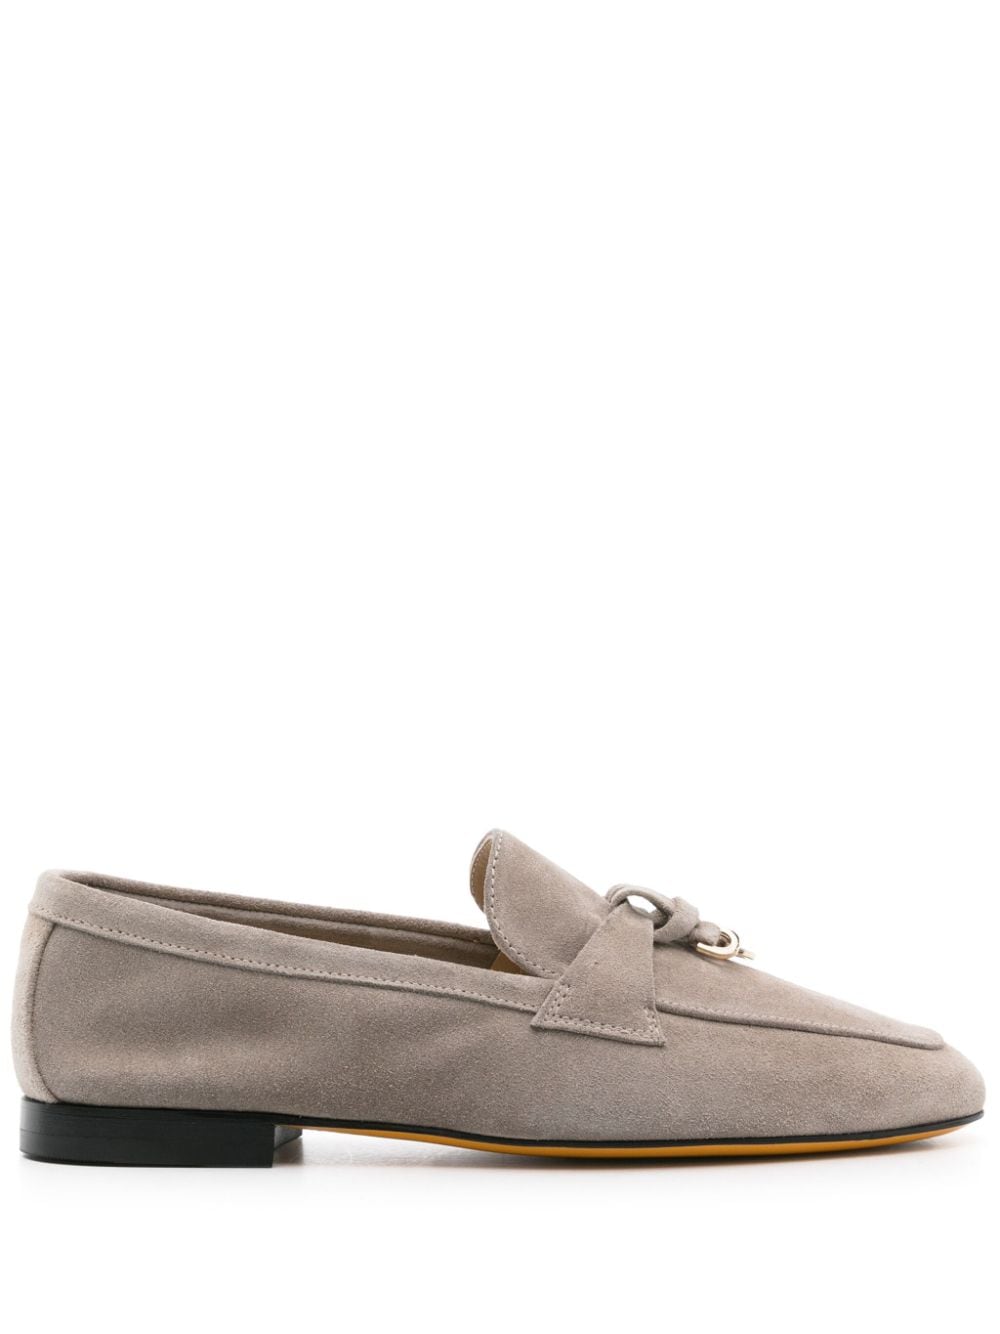 Doucal's strap-detailing suede loafers - Neutrals von Doucal's